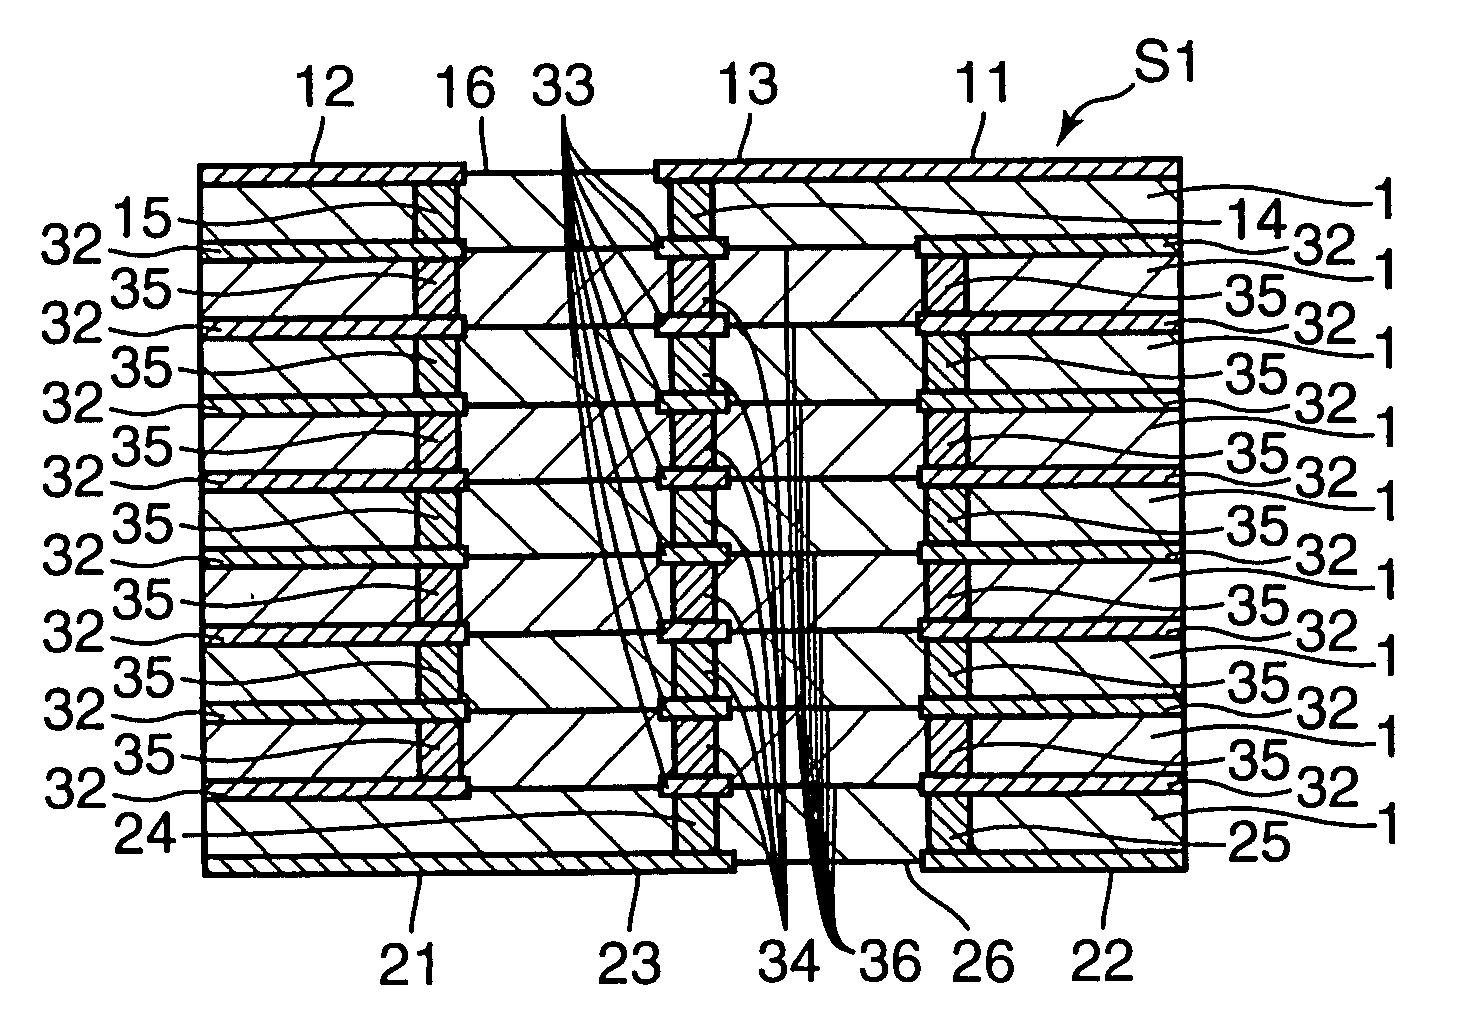 High-frequency signal transmitting device